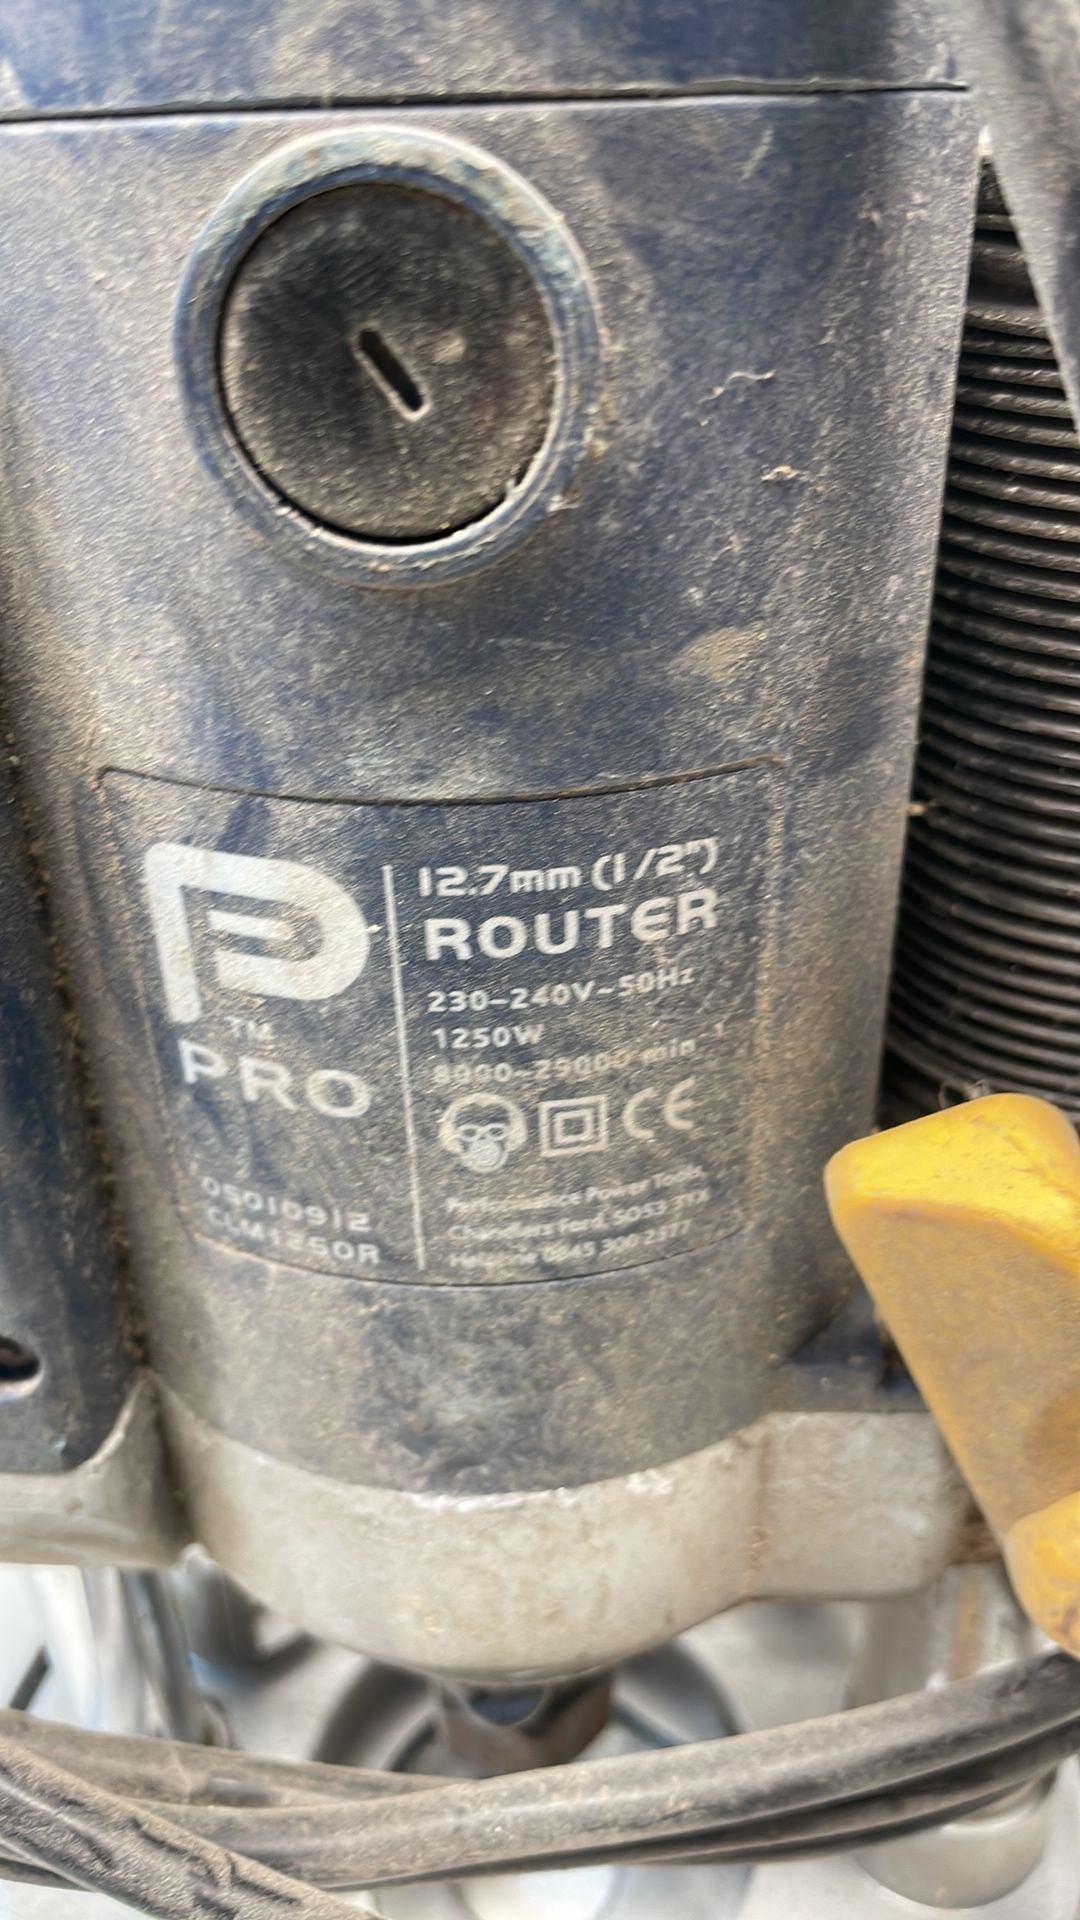 PRO | 1250W | 12.7mm Router - Image 4 of 4